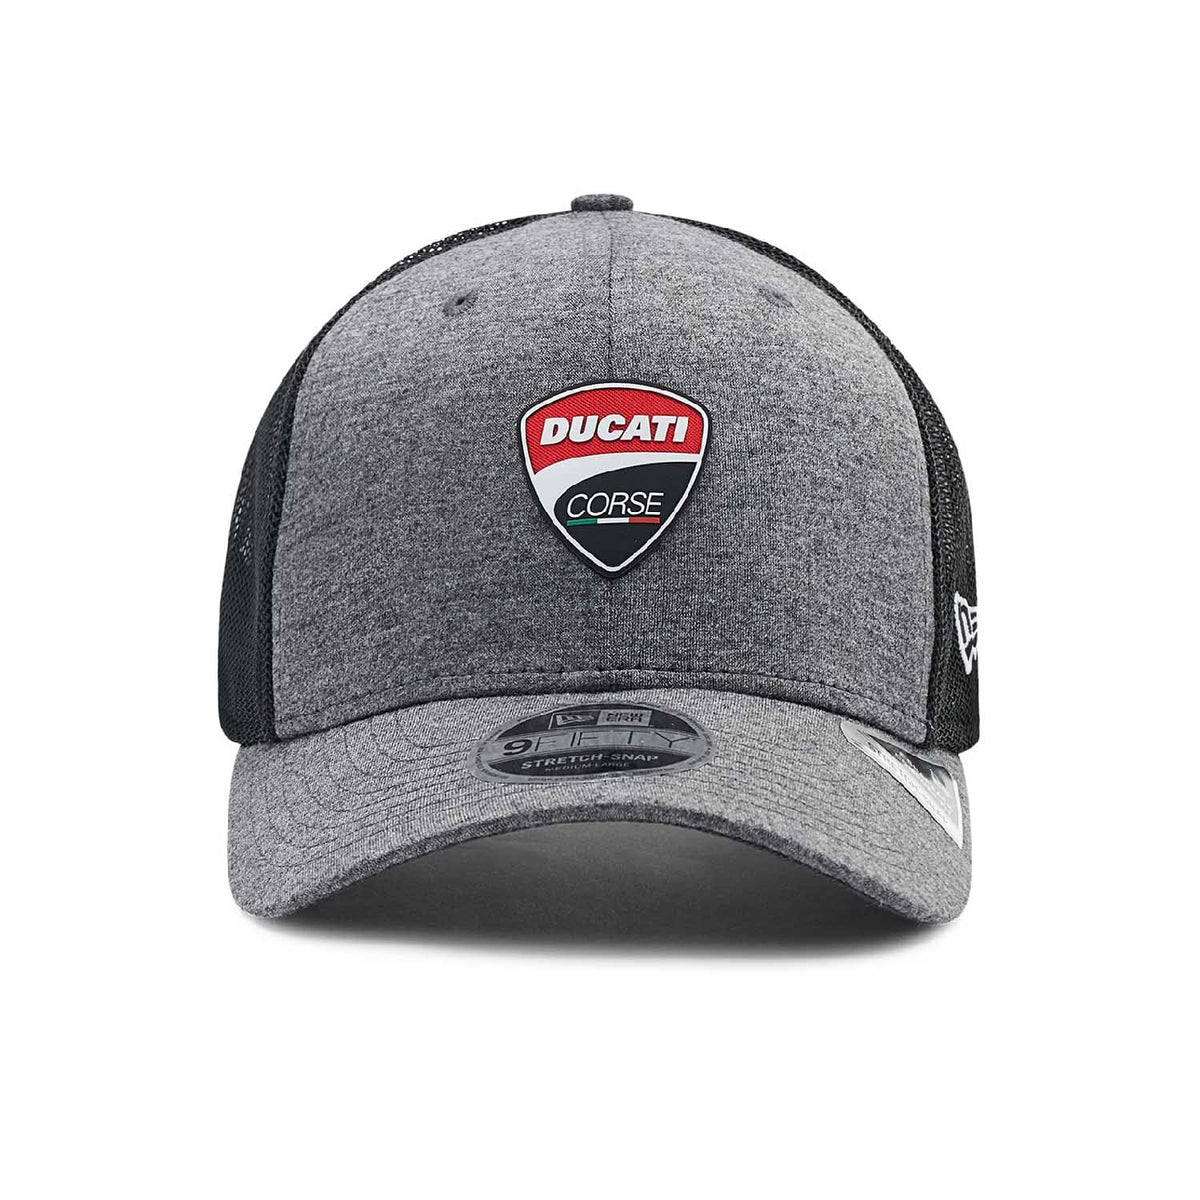 Ducati Corse Jersey Grey 9FIFTY Stretch Snap Cap – Fueler store